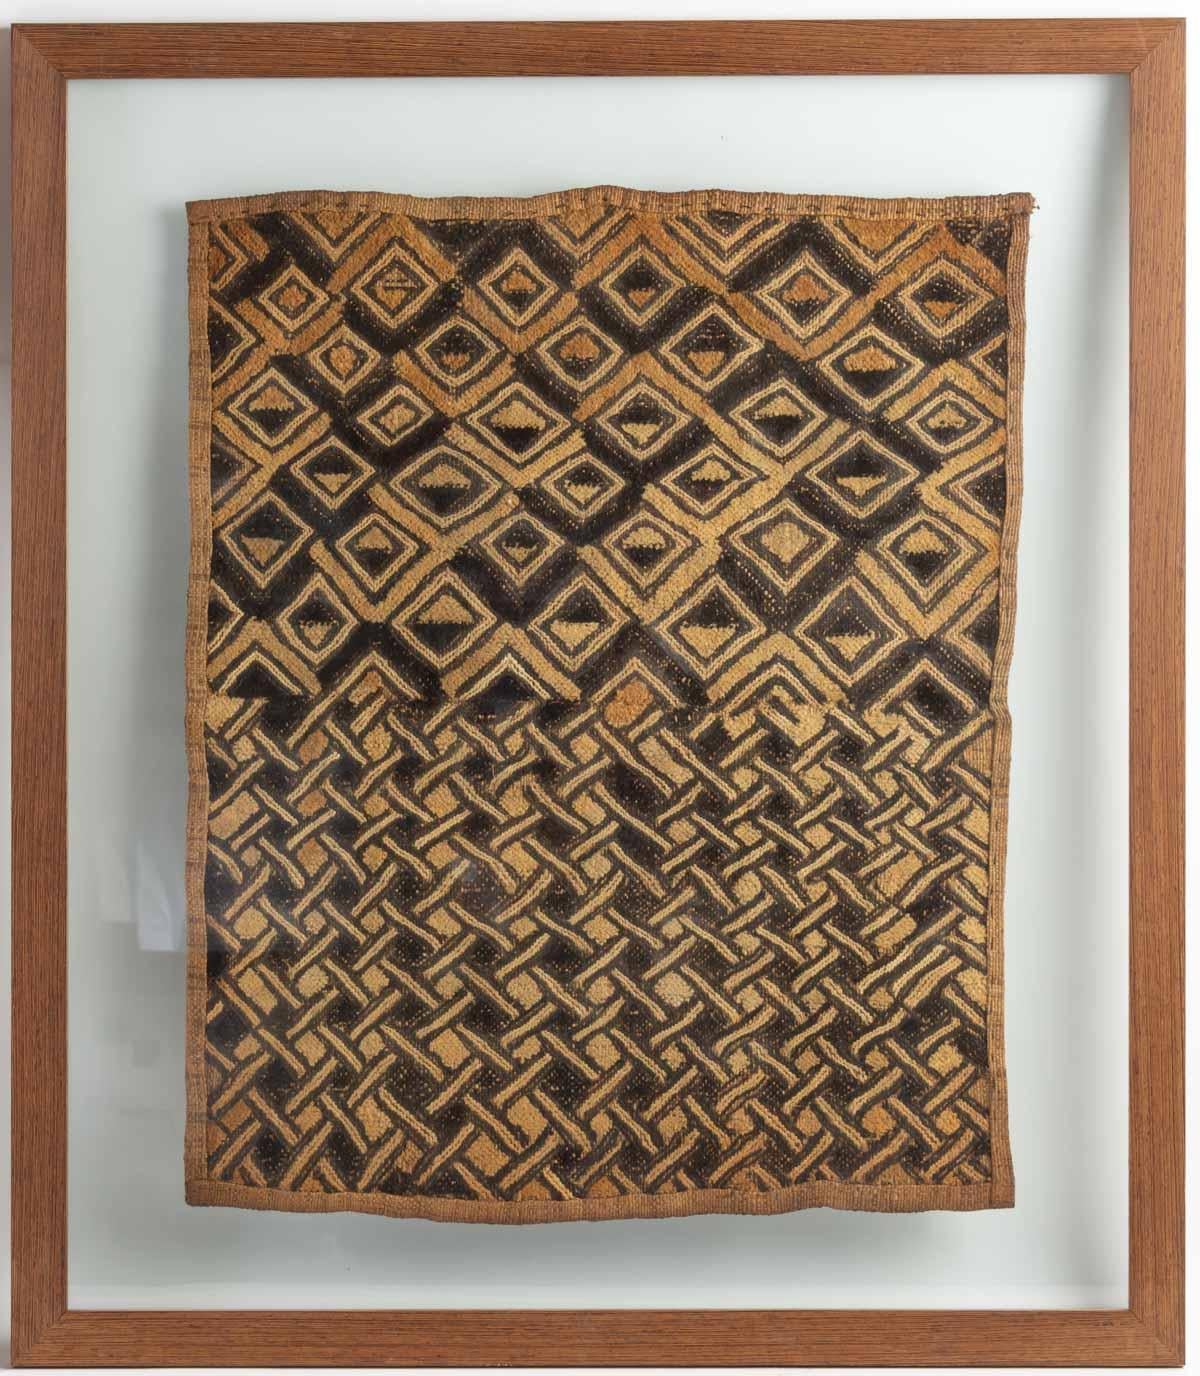 Woven Pair of Framed African Fabrics, Early 20th Century